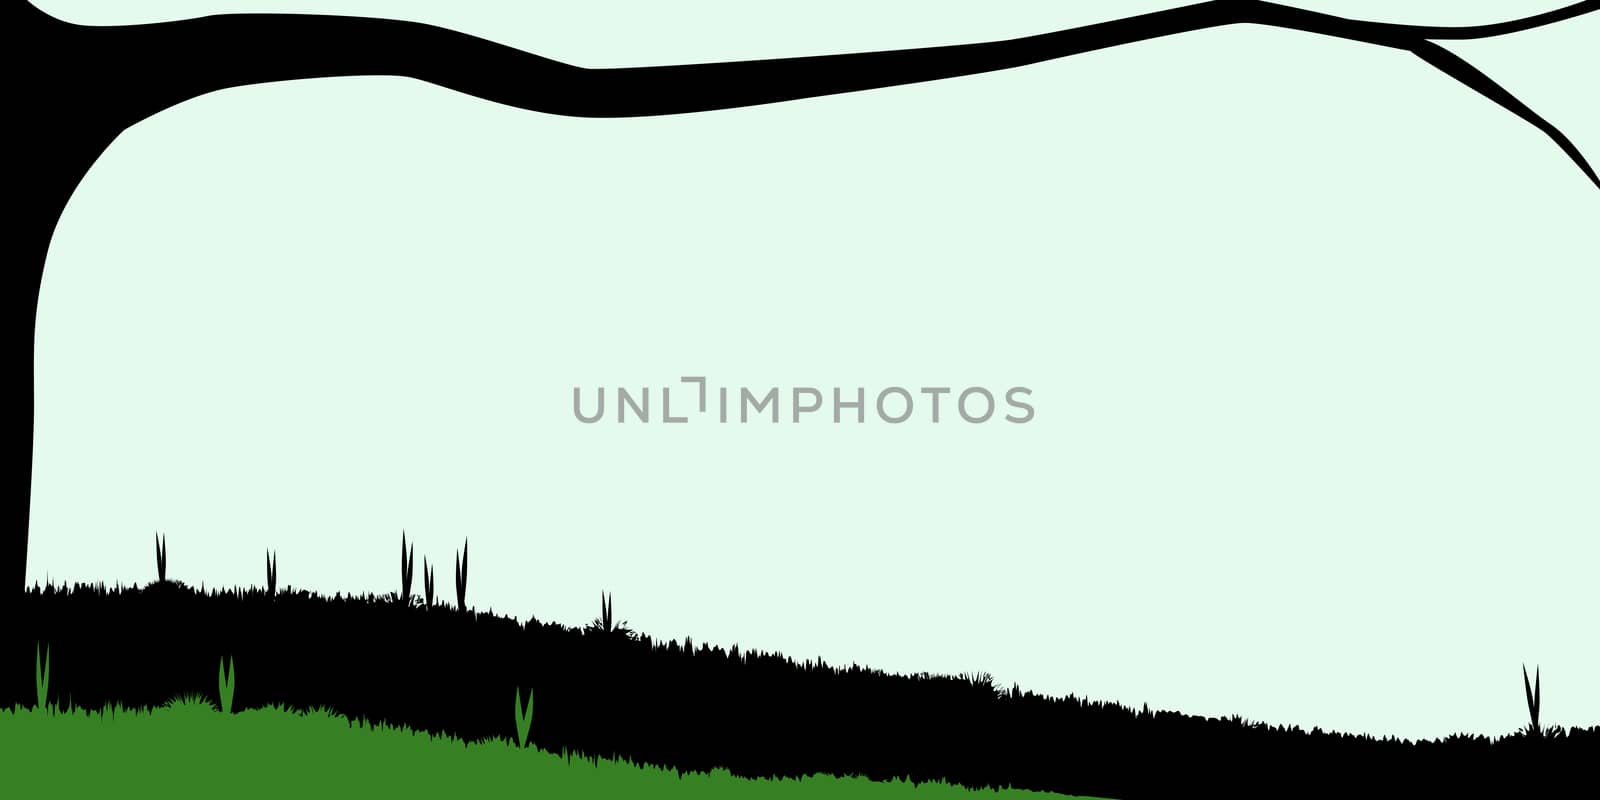 Silhouette of a branch stretching out over a meadow.